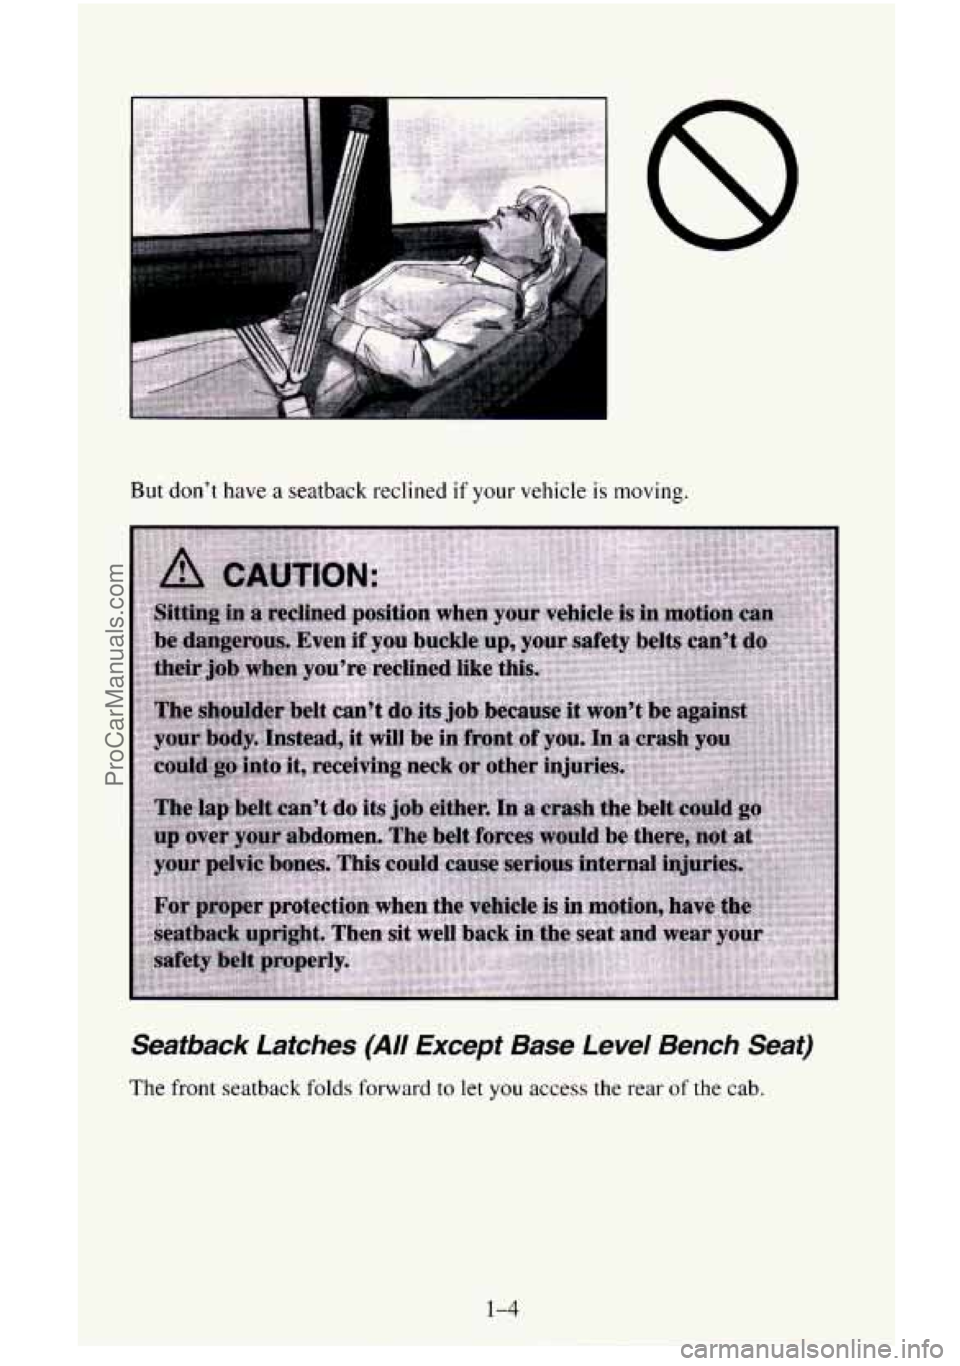 CHEVROLET SUBURBAN 1996 User Guide But don’t have a seatback reclined if your vehicle is moving. 
Seatback  Latches  (All  Except  Base  Level  Bench  Seat) 
The  front  seatback  folds  forward to let you access the rear of the  cab